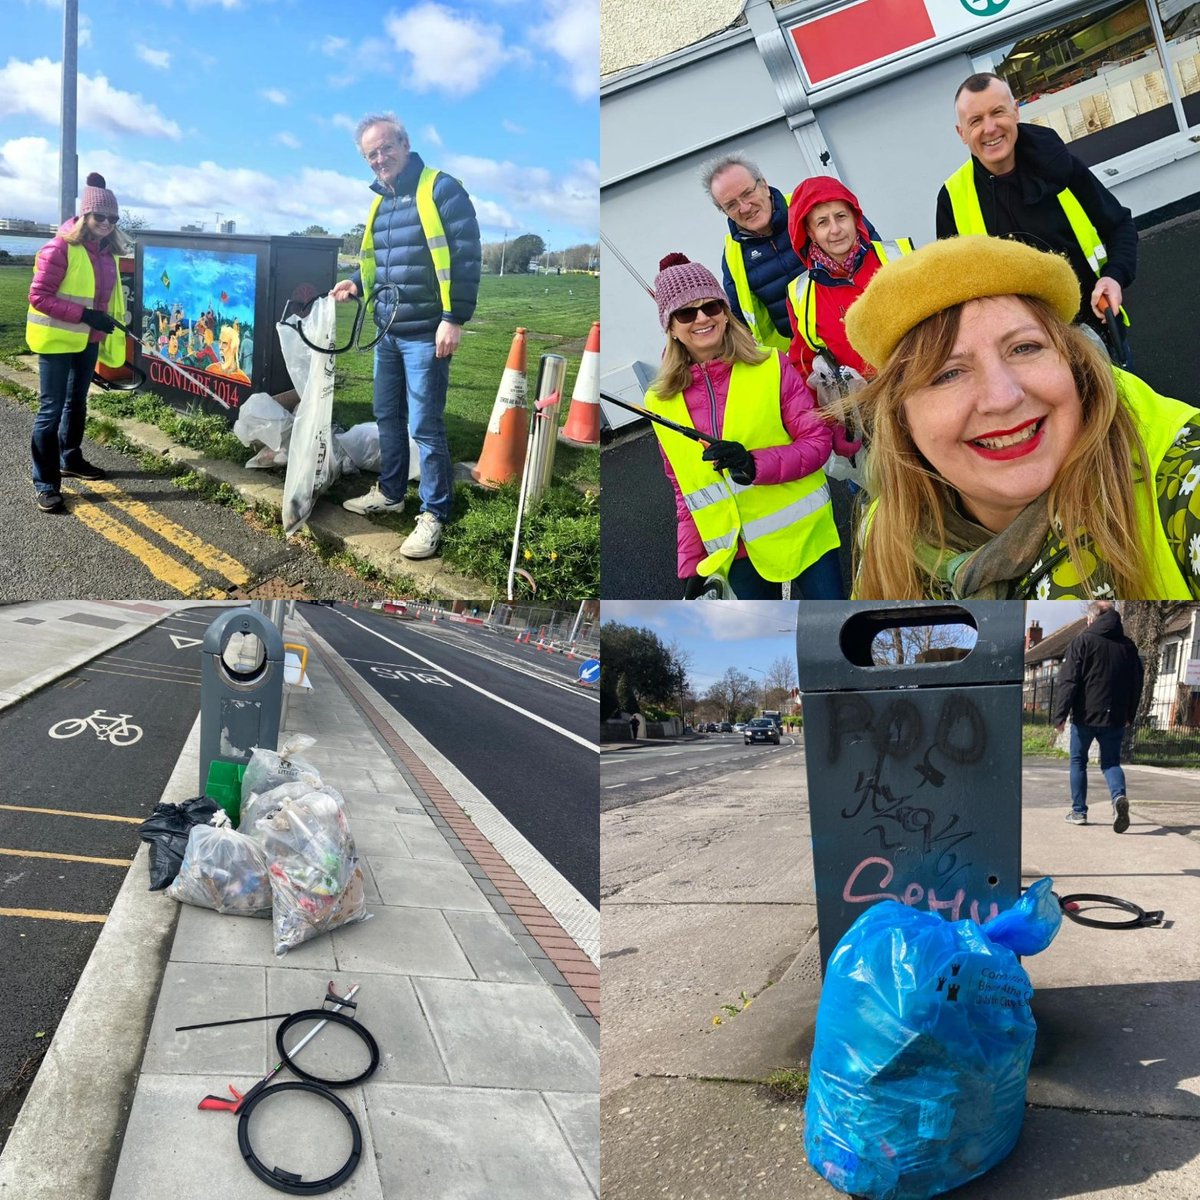 Well done to our volunteers out again last Saturday helping #KeepClontarfTidy. Why not join us on a Saturday or add a litter pick to your next walk